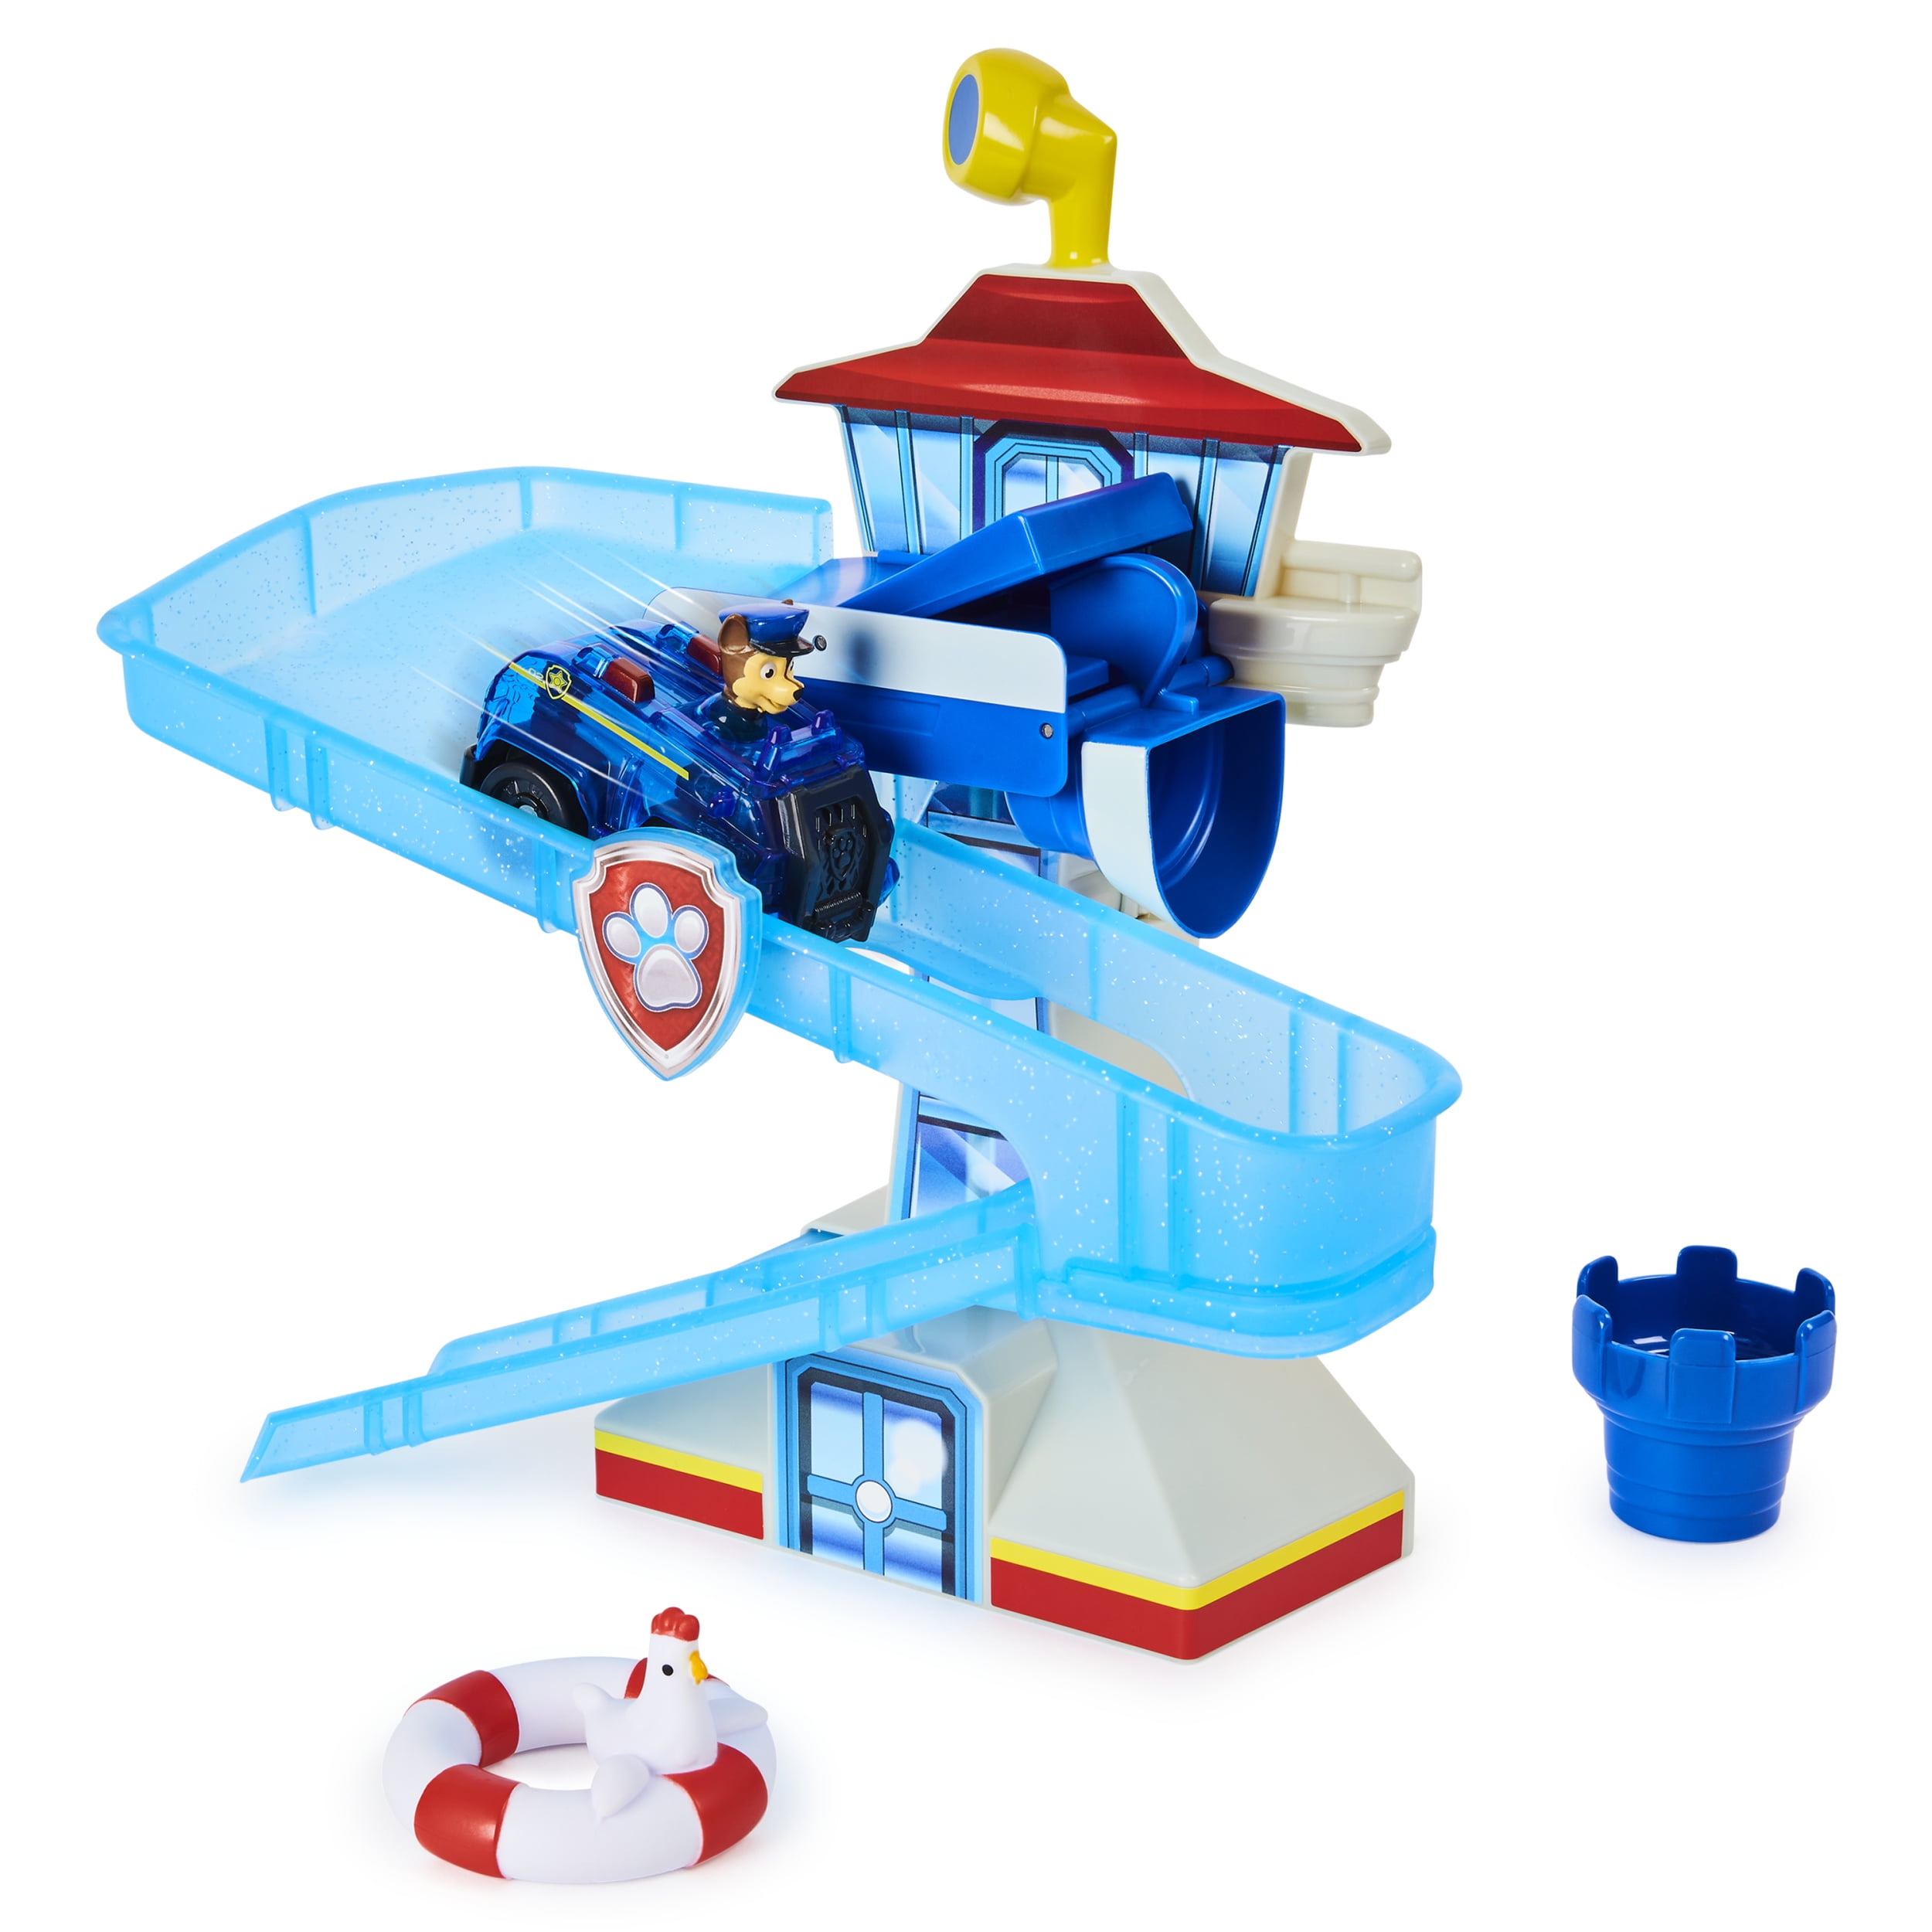 Details about   PAW PATROL Chase Race & Go Deluxe Vehicle w/ Sound- Blue Race Ready 